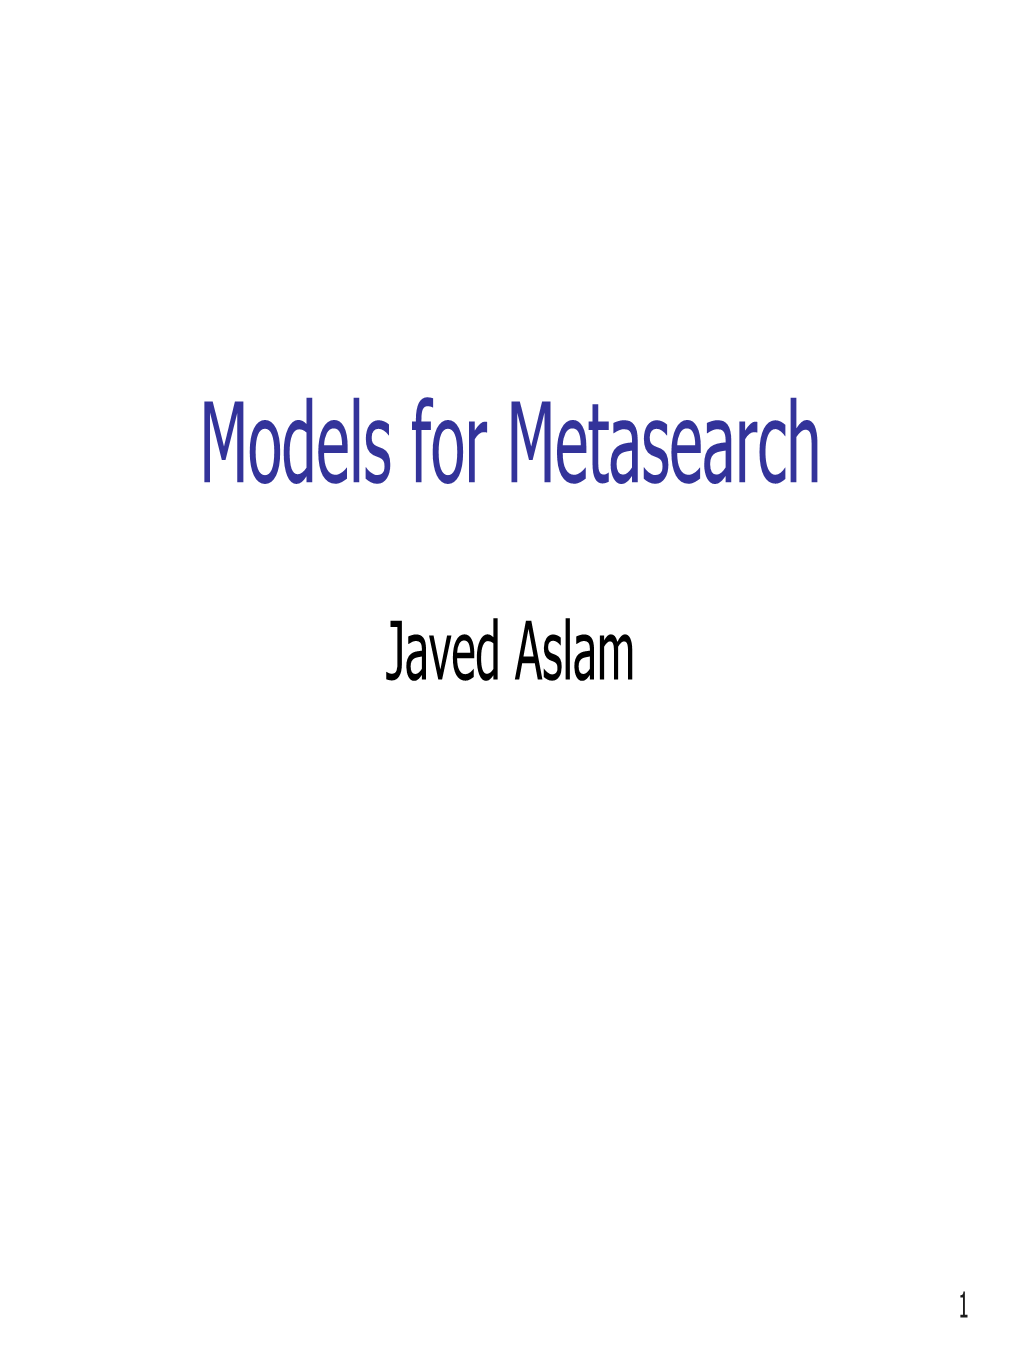 Models for Metasearch